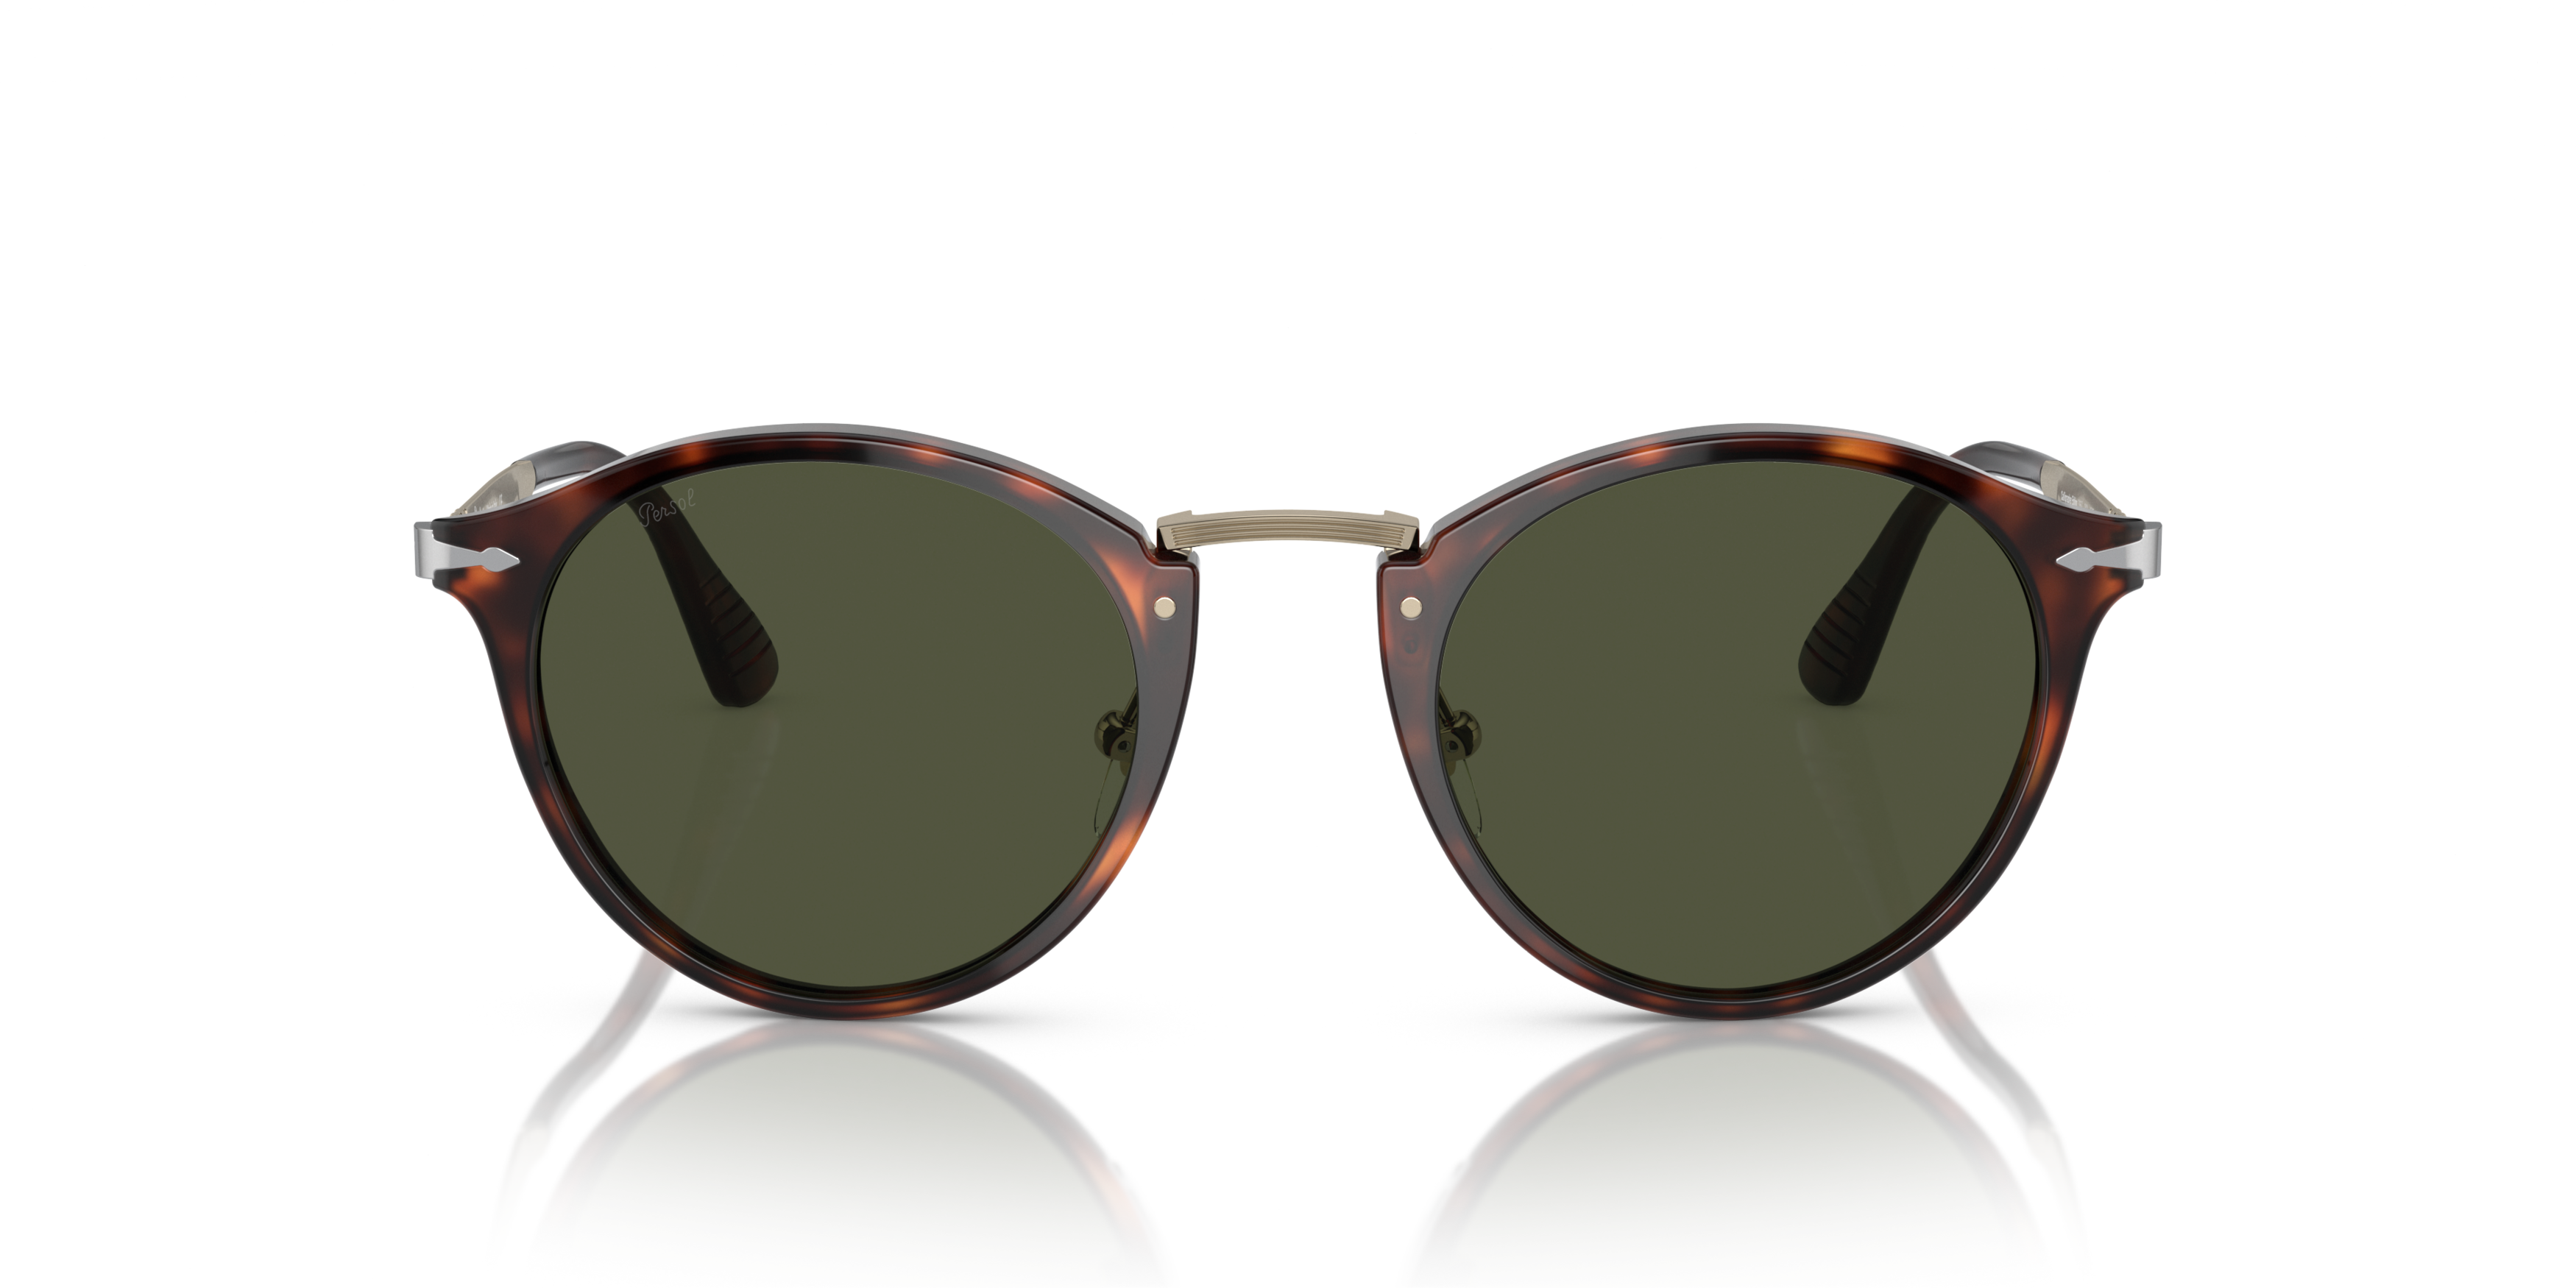 [products.image.front] Persol 0PO3166S 24/31